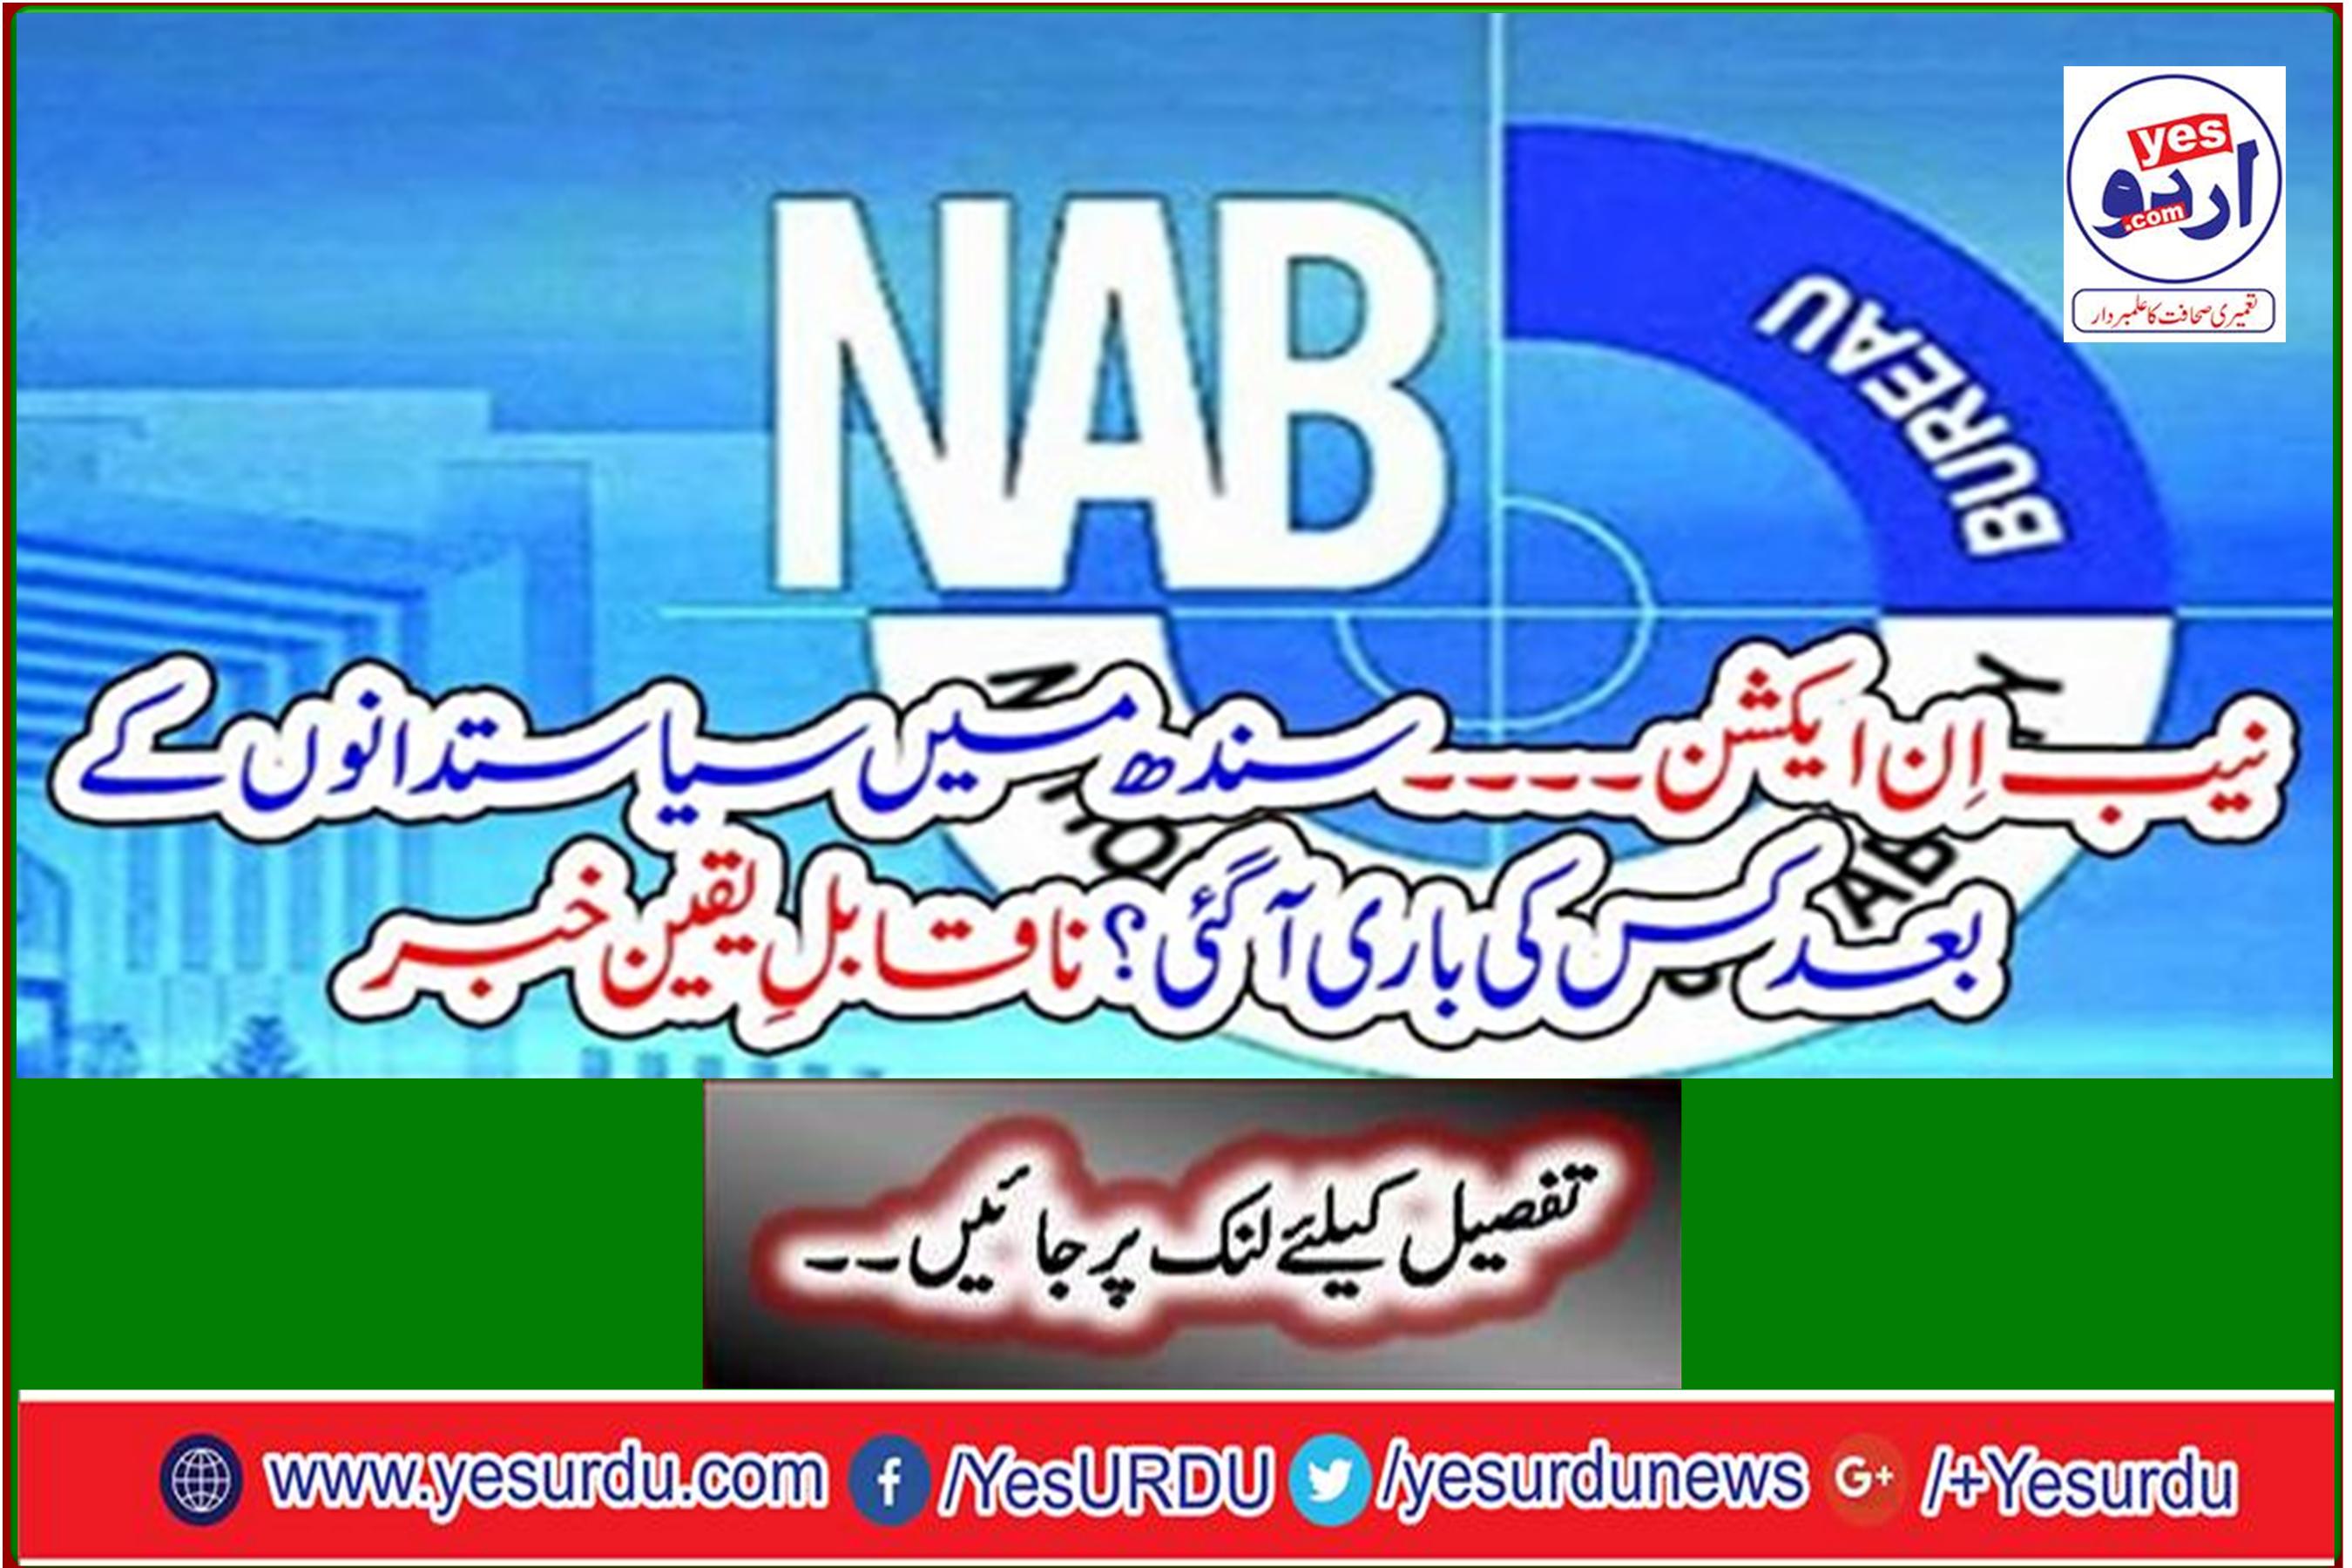 NAB in action ... Who turned after the politicians in Sindh? Incredible news